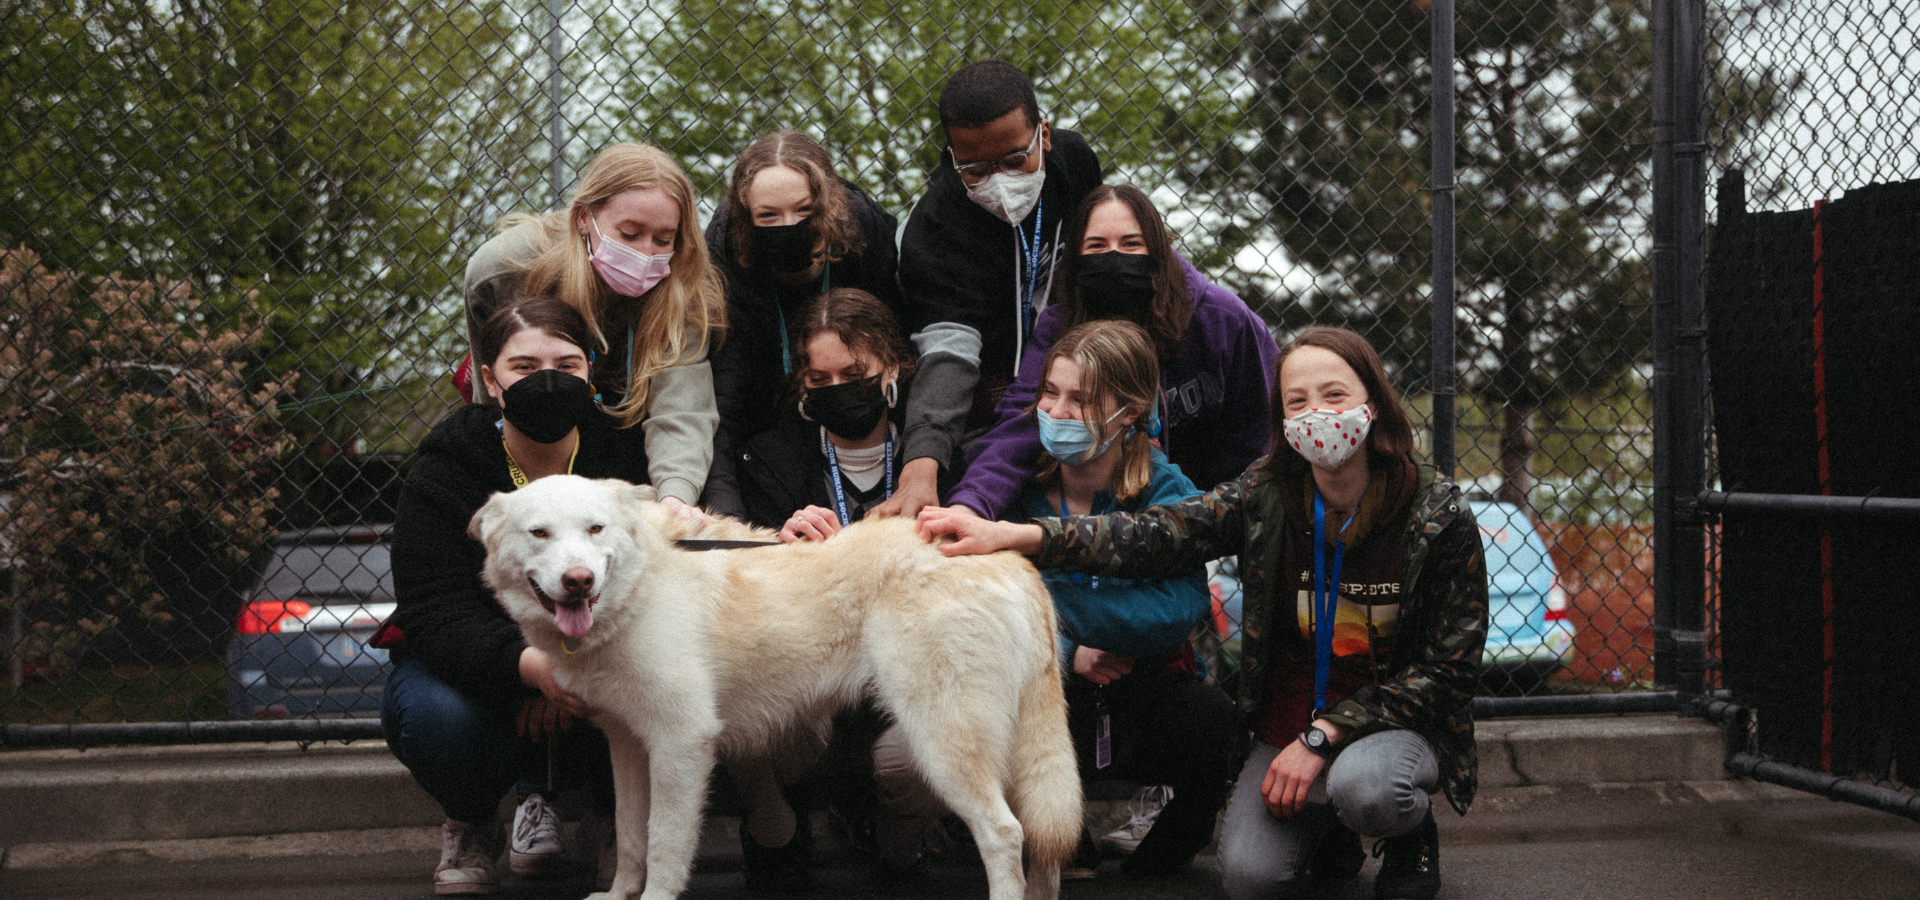 Youth Volunteers in outdoor run with dog